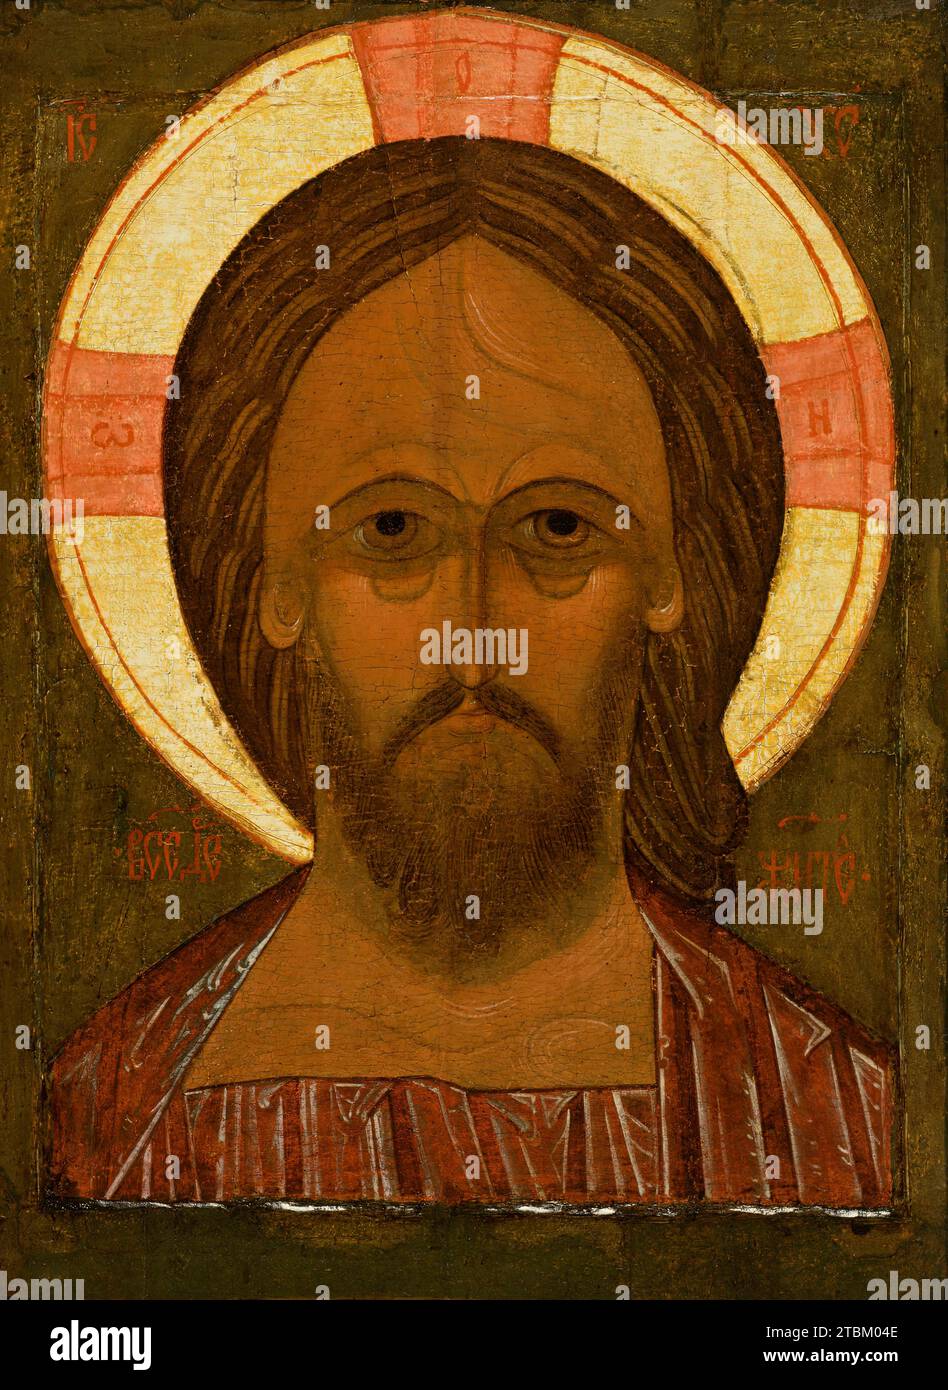 Christ Pantokrator, 16th century. Such large, powerful portraits of Christ &quot;Pantokrator&quot; (almighty) were customarily displayed on the iconostasis, or icon screen, separating the lay people in the nave from the altar area of the church. The use of an iconostasis, as well as this type of portrait icon, were adopted from Byzantium. In style, however, the icon is distinctly Russian, with Christ's large, heavily shadowed eyes and straight, narrow nose contributing to a stern expression appropriate to his role as Judge and Ruler. Stock Photo